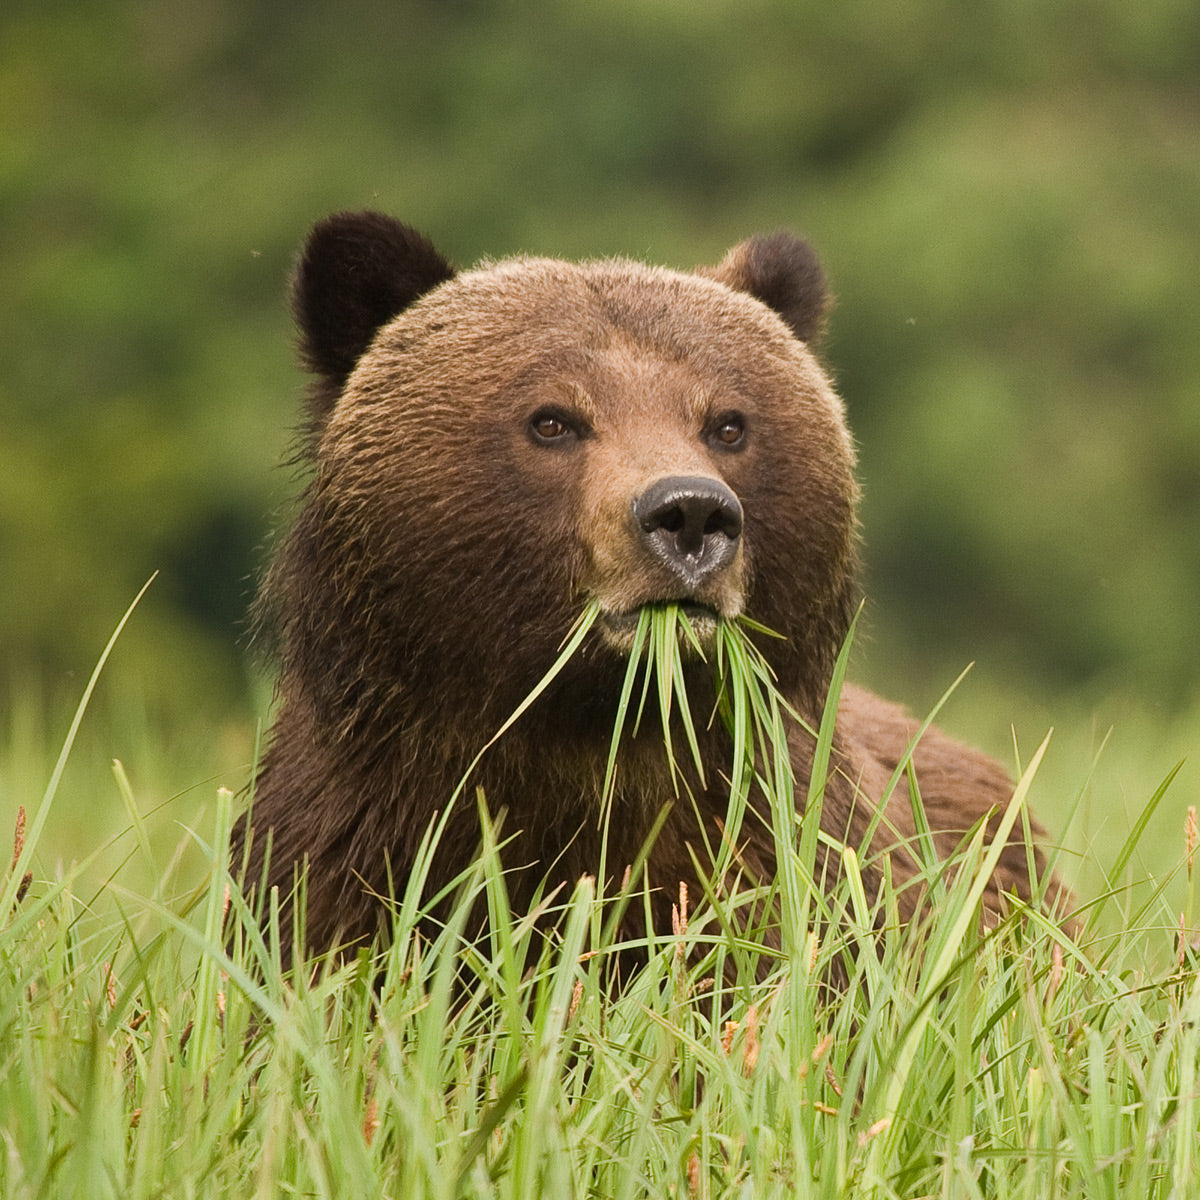 A close up photo of a grizzly bear eating grass